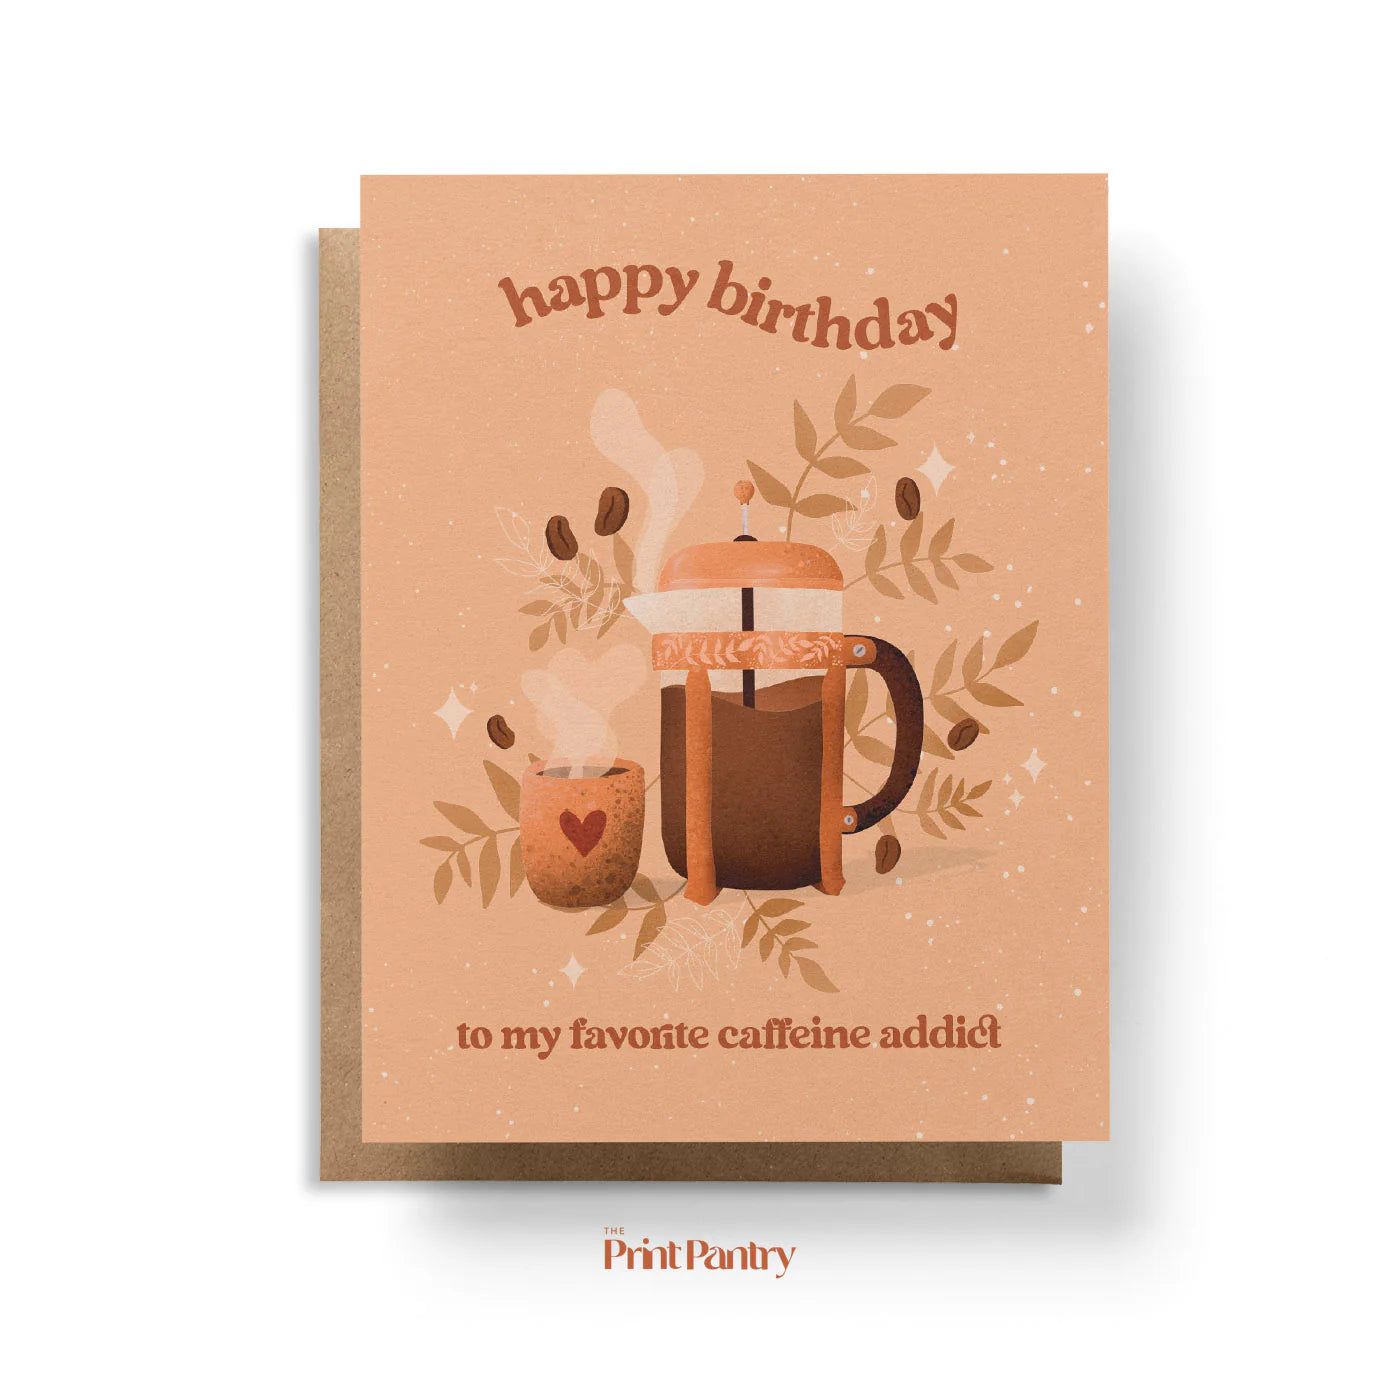 Greeting Cards - Biodegradable